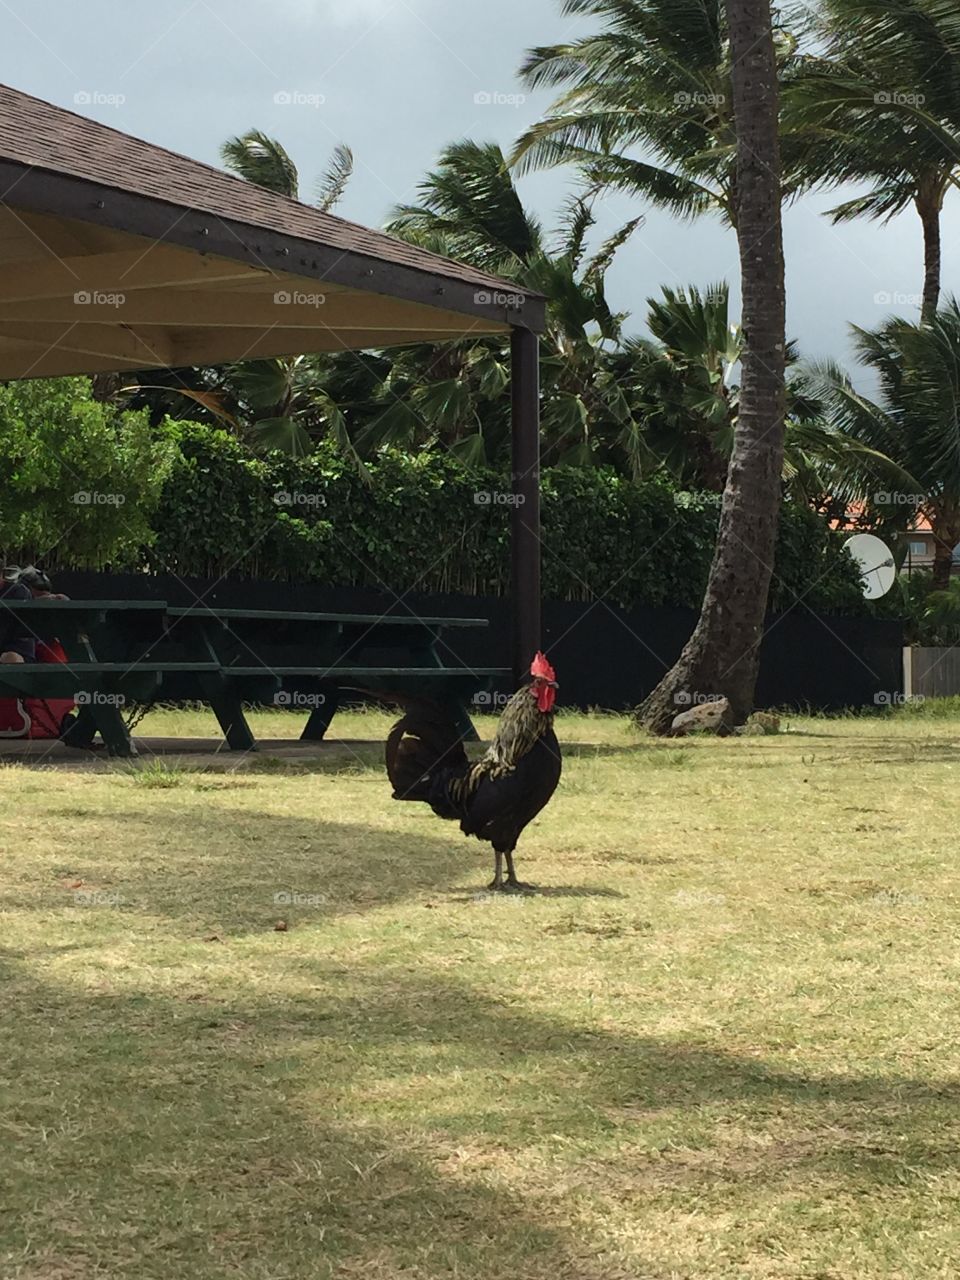 The wildlife on the island is something to be admired. They roam amongst the people & causally go about their day.